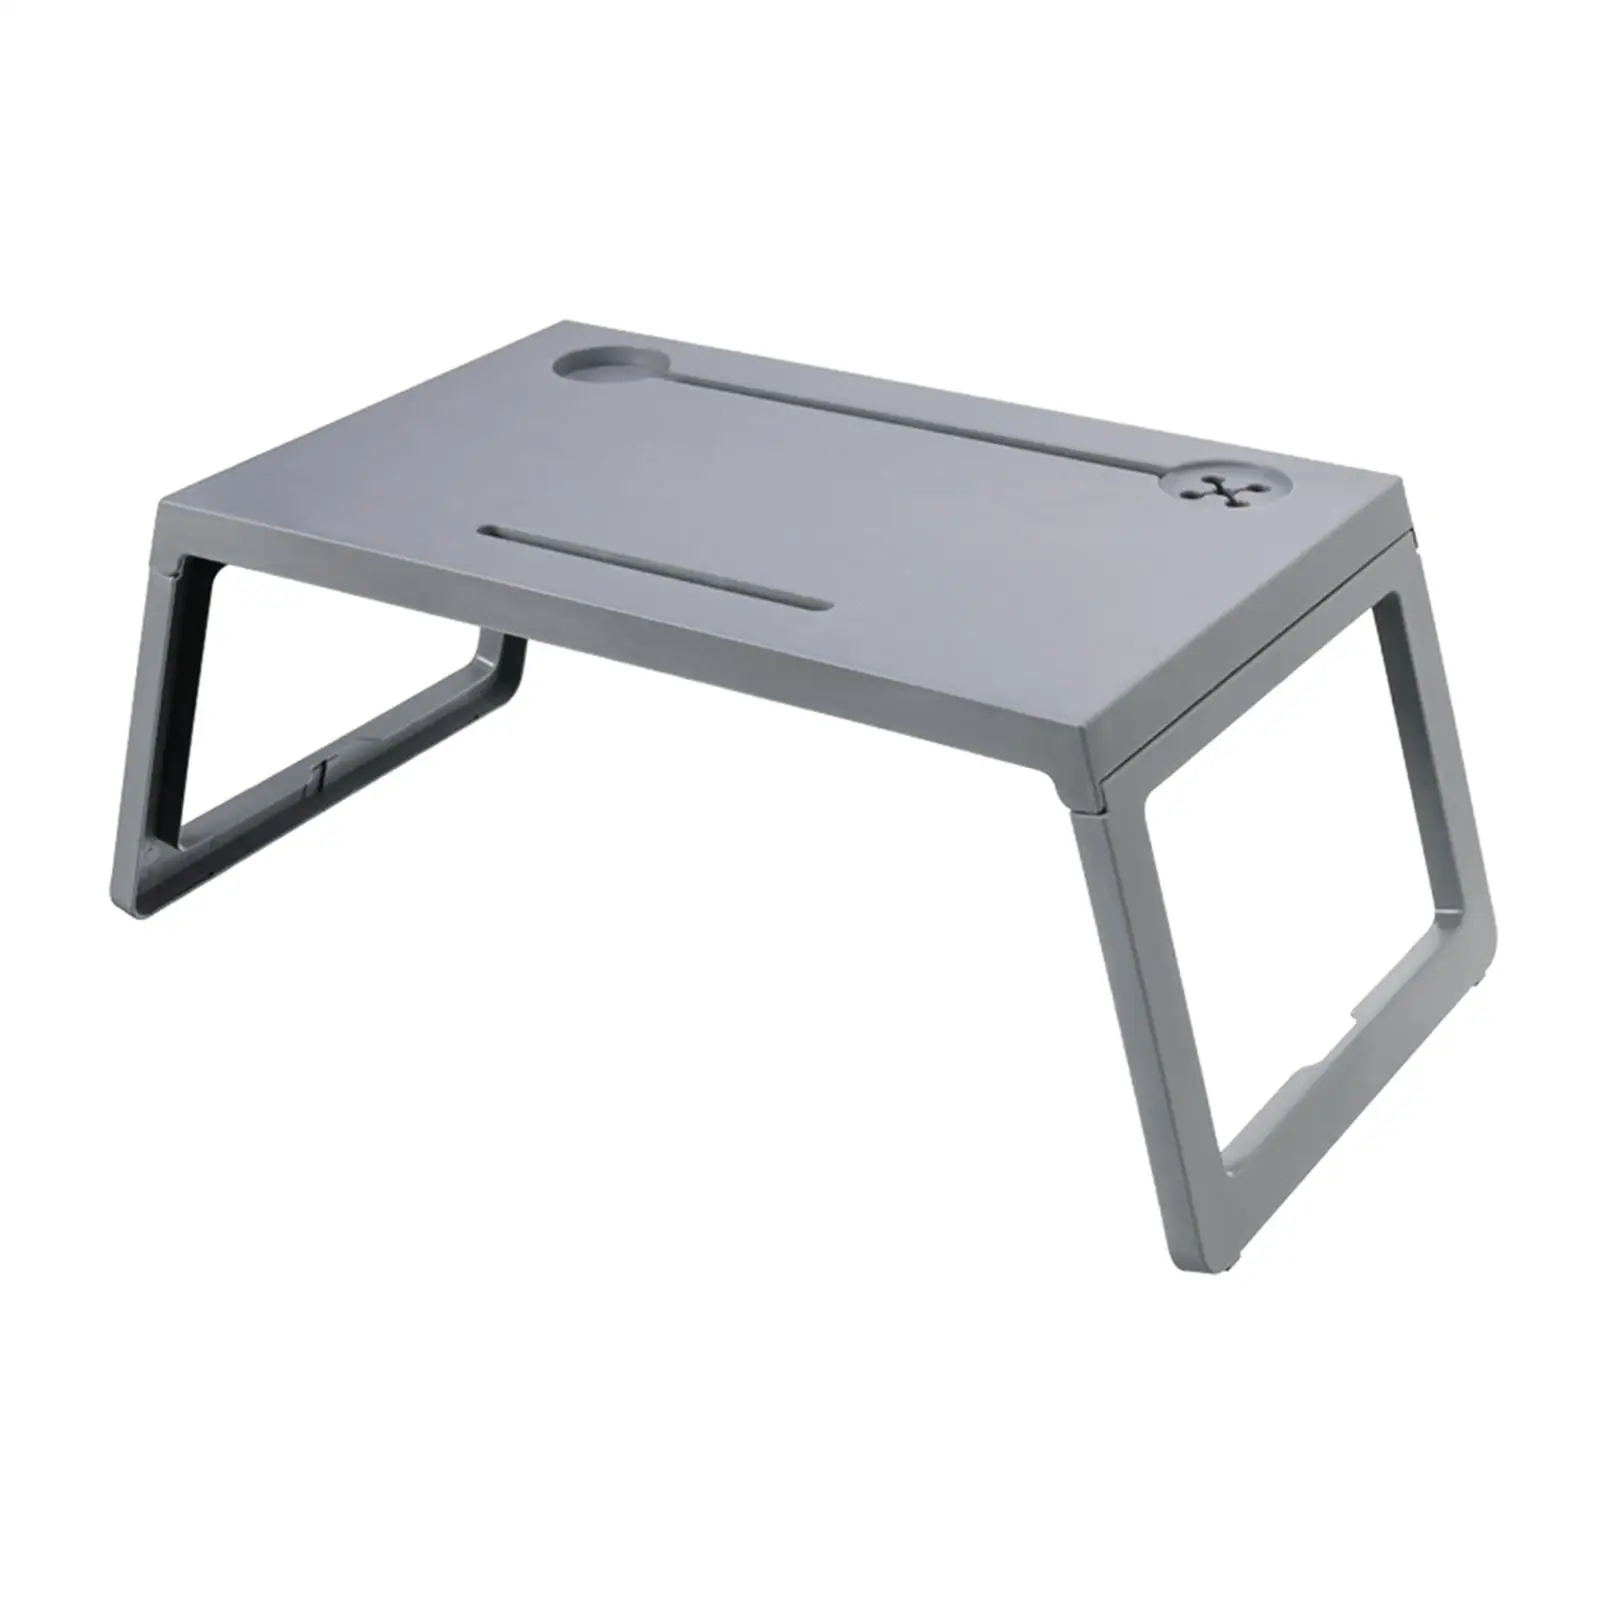 Adjustable Laptop Desk with cups Holder Drawer Breakfast Tray Portable Laptop Table for Reading Floor Table Watching Sofa Bed